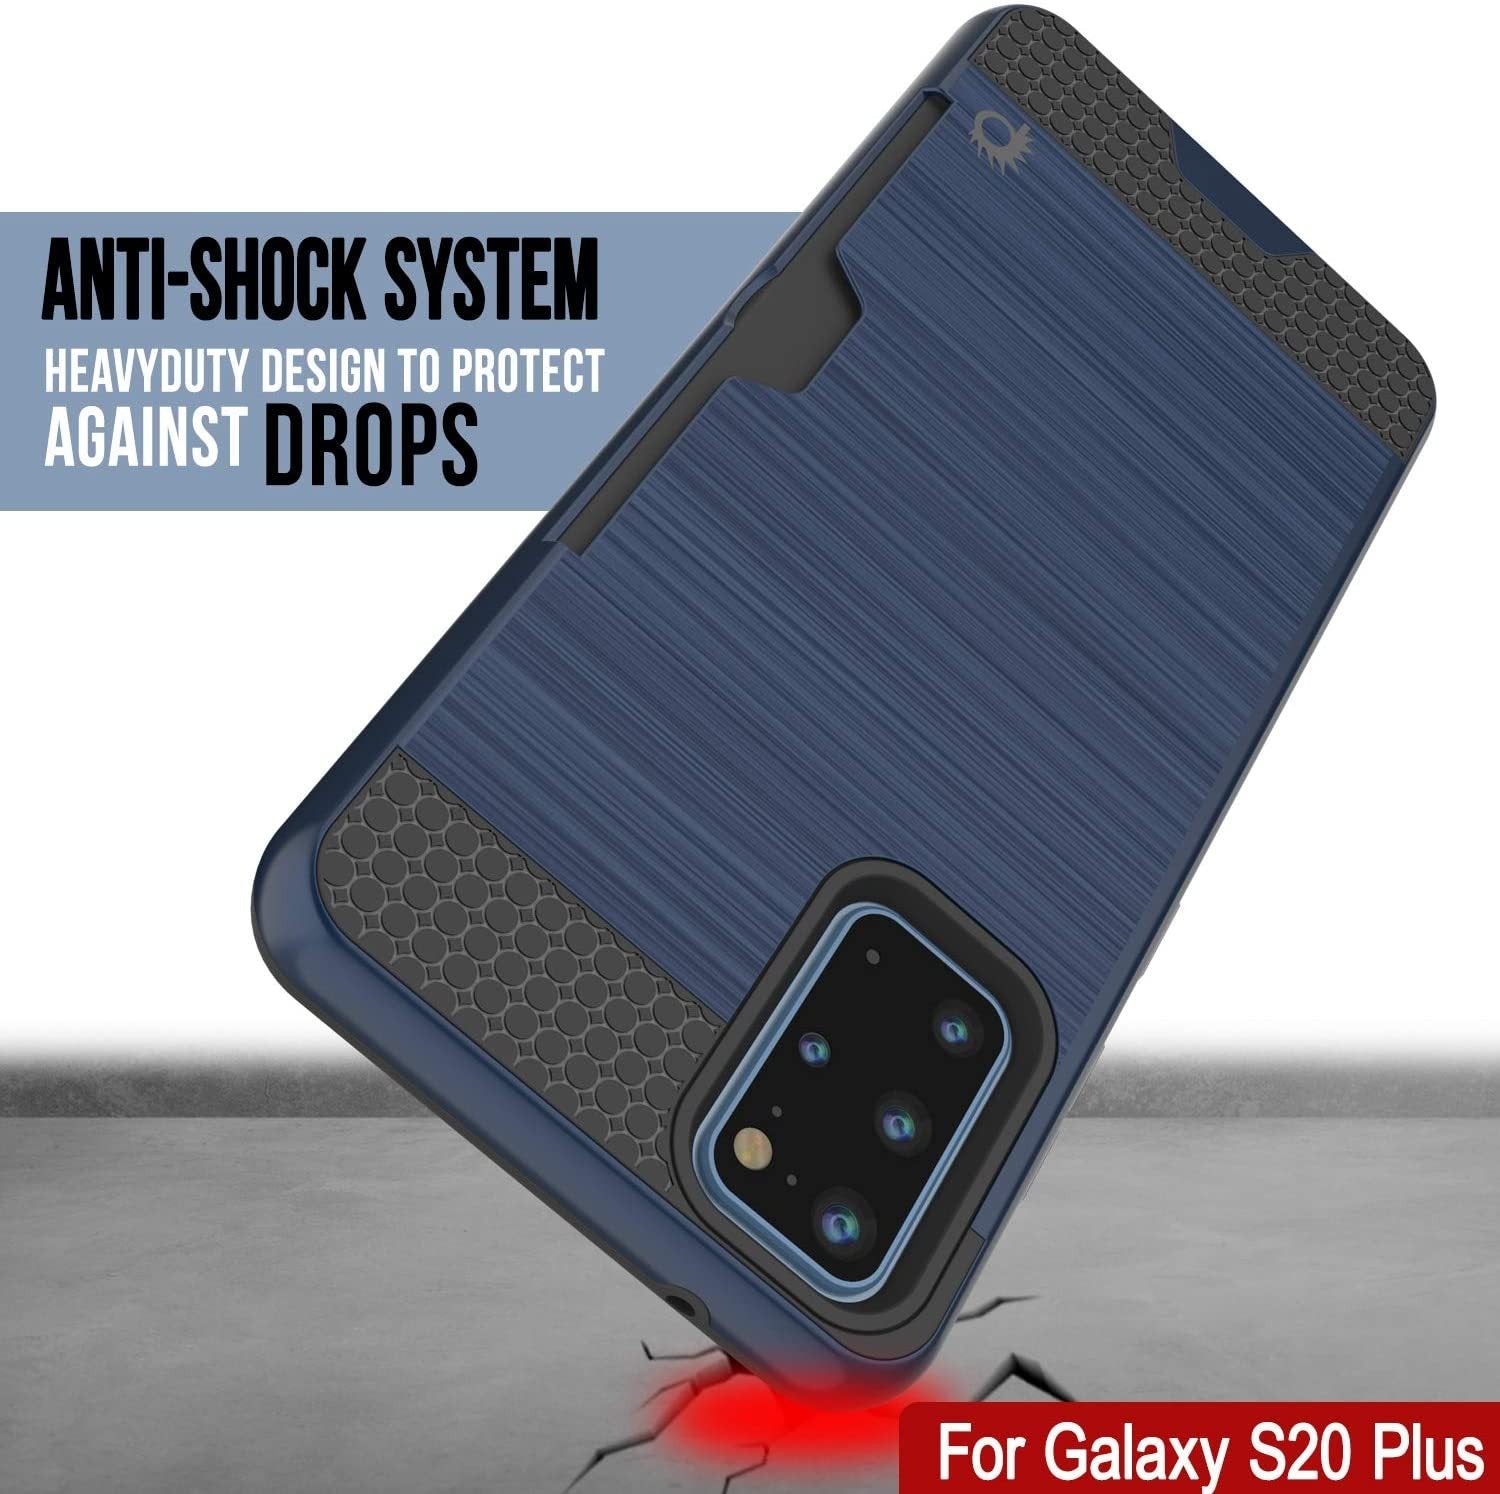 Galaxy S20+ Plus  Case, PUNKcase [SLOT Series] [Slim Fit] Dual-Layer Armor Cover w/Integrated Anti-Shock System, Credit Card Slot [Navy]